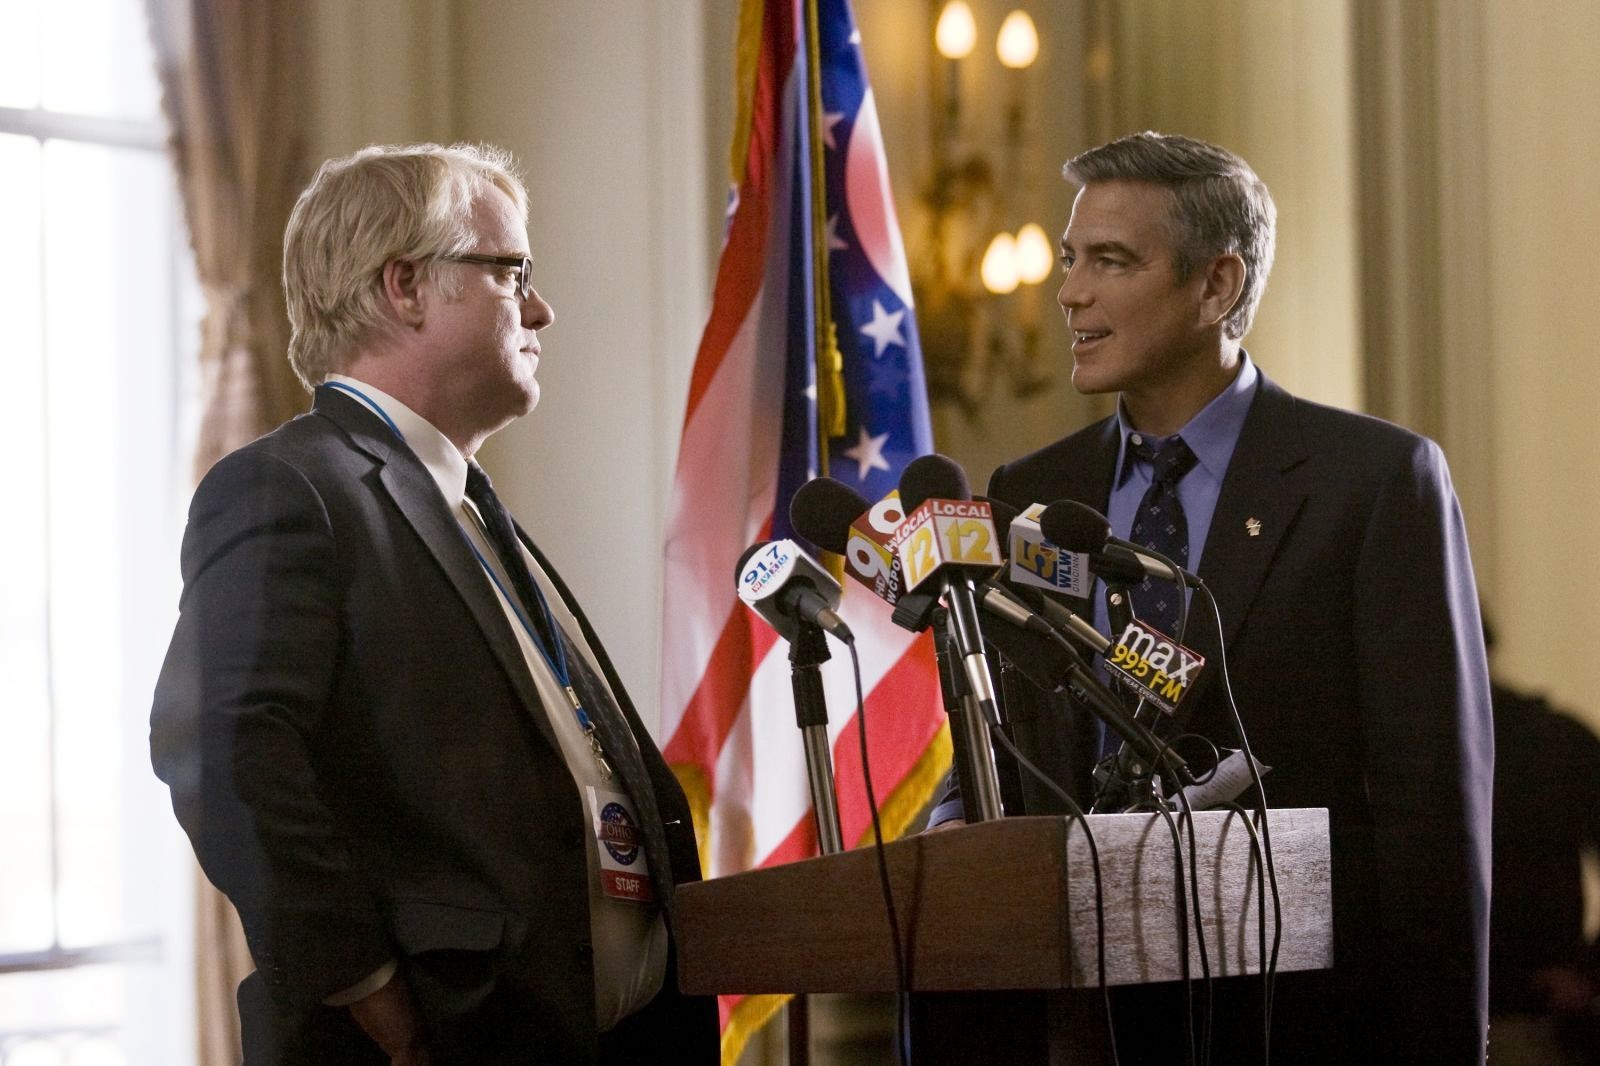 Philip Seymour Hoffman stars as Paul Zara and George Clooney stars as Governor Mike Morris in Columbia Pictures' The Ides of March (2011)